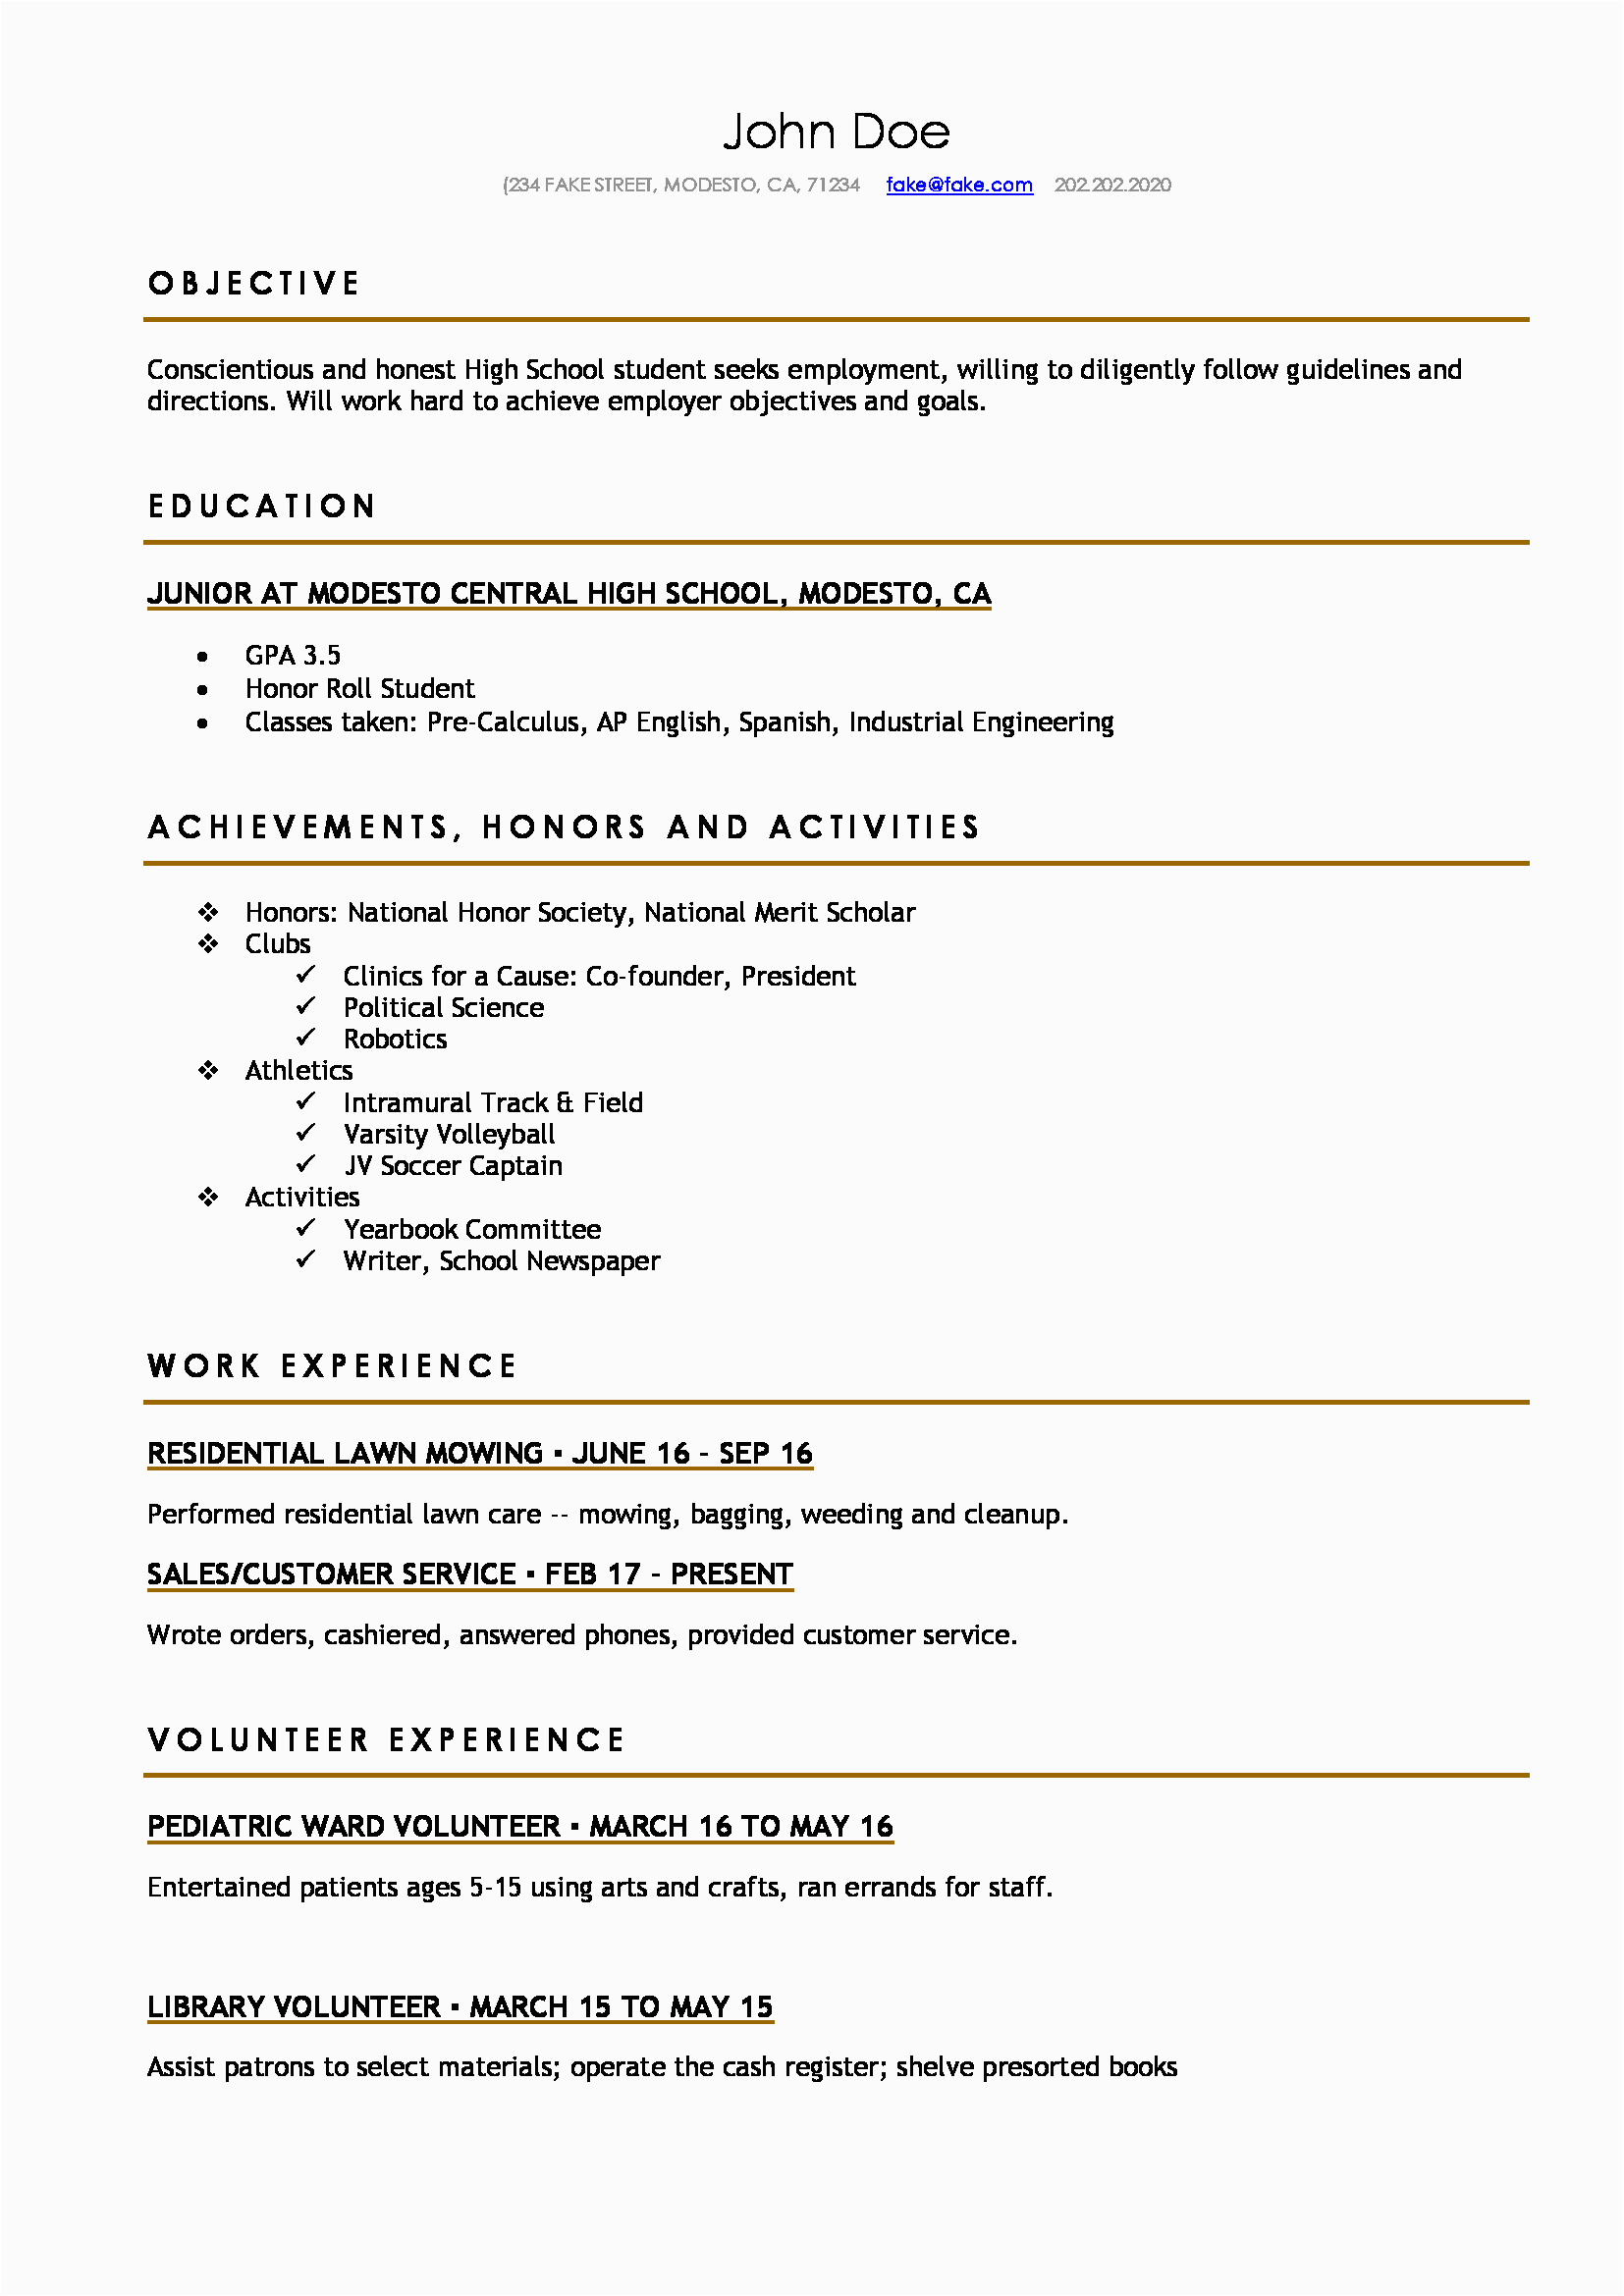 Simple Sample Resume for High School Student High School Resume Resumes Perfect for High School Students